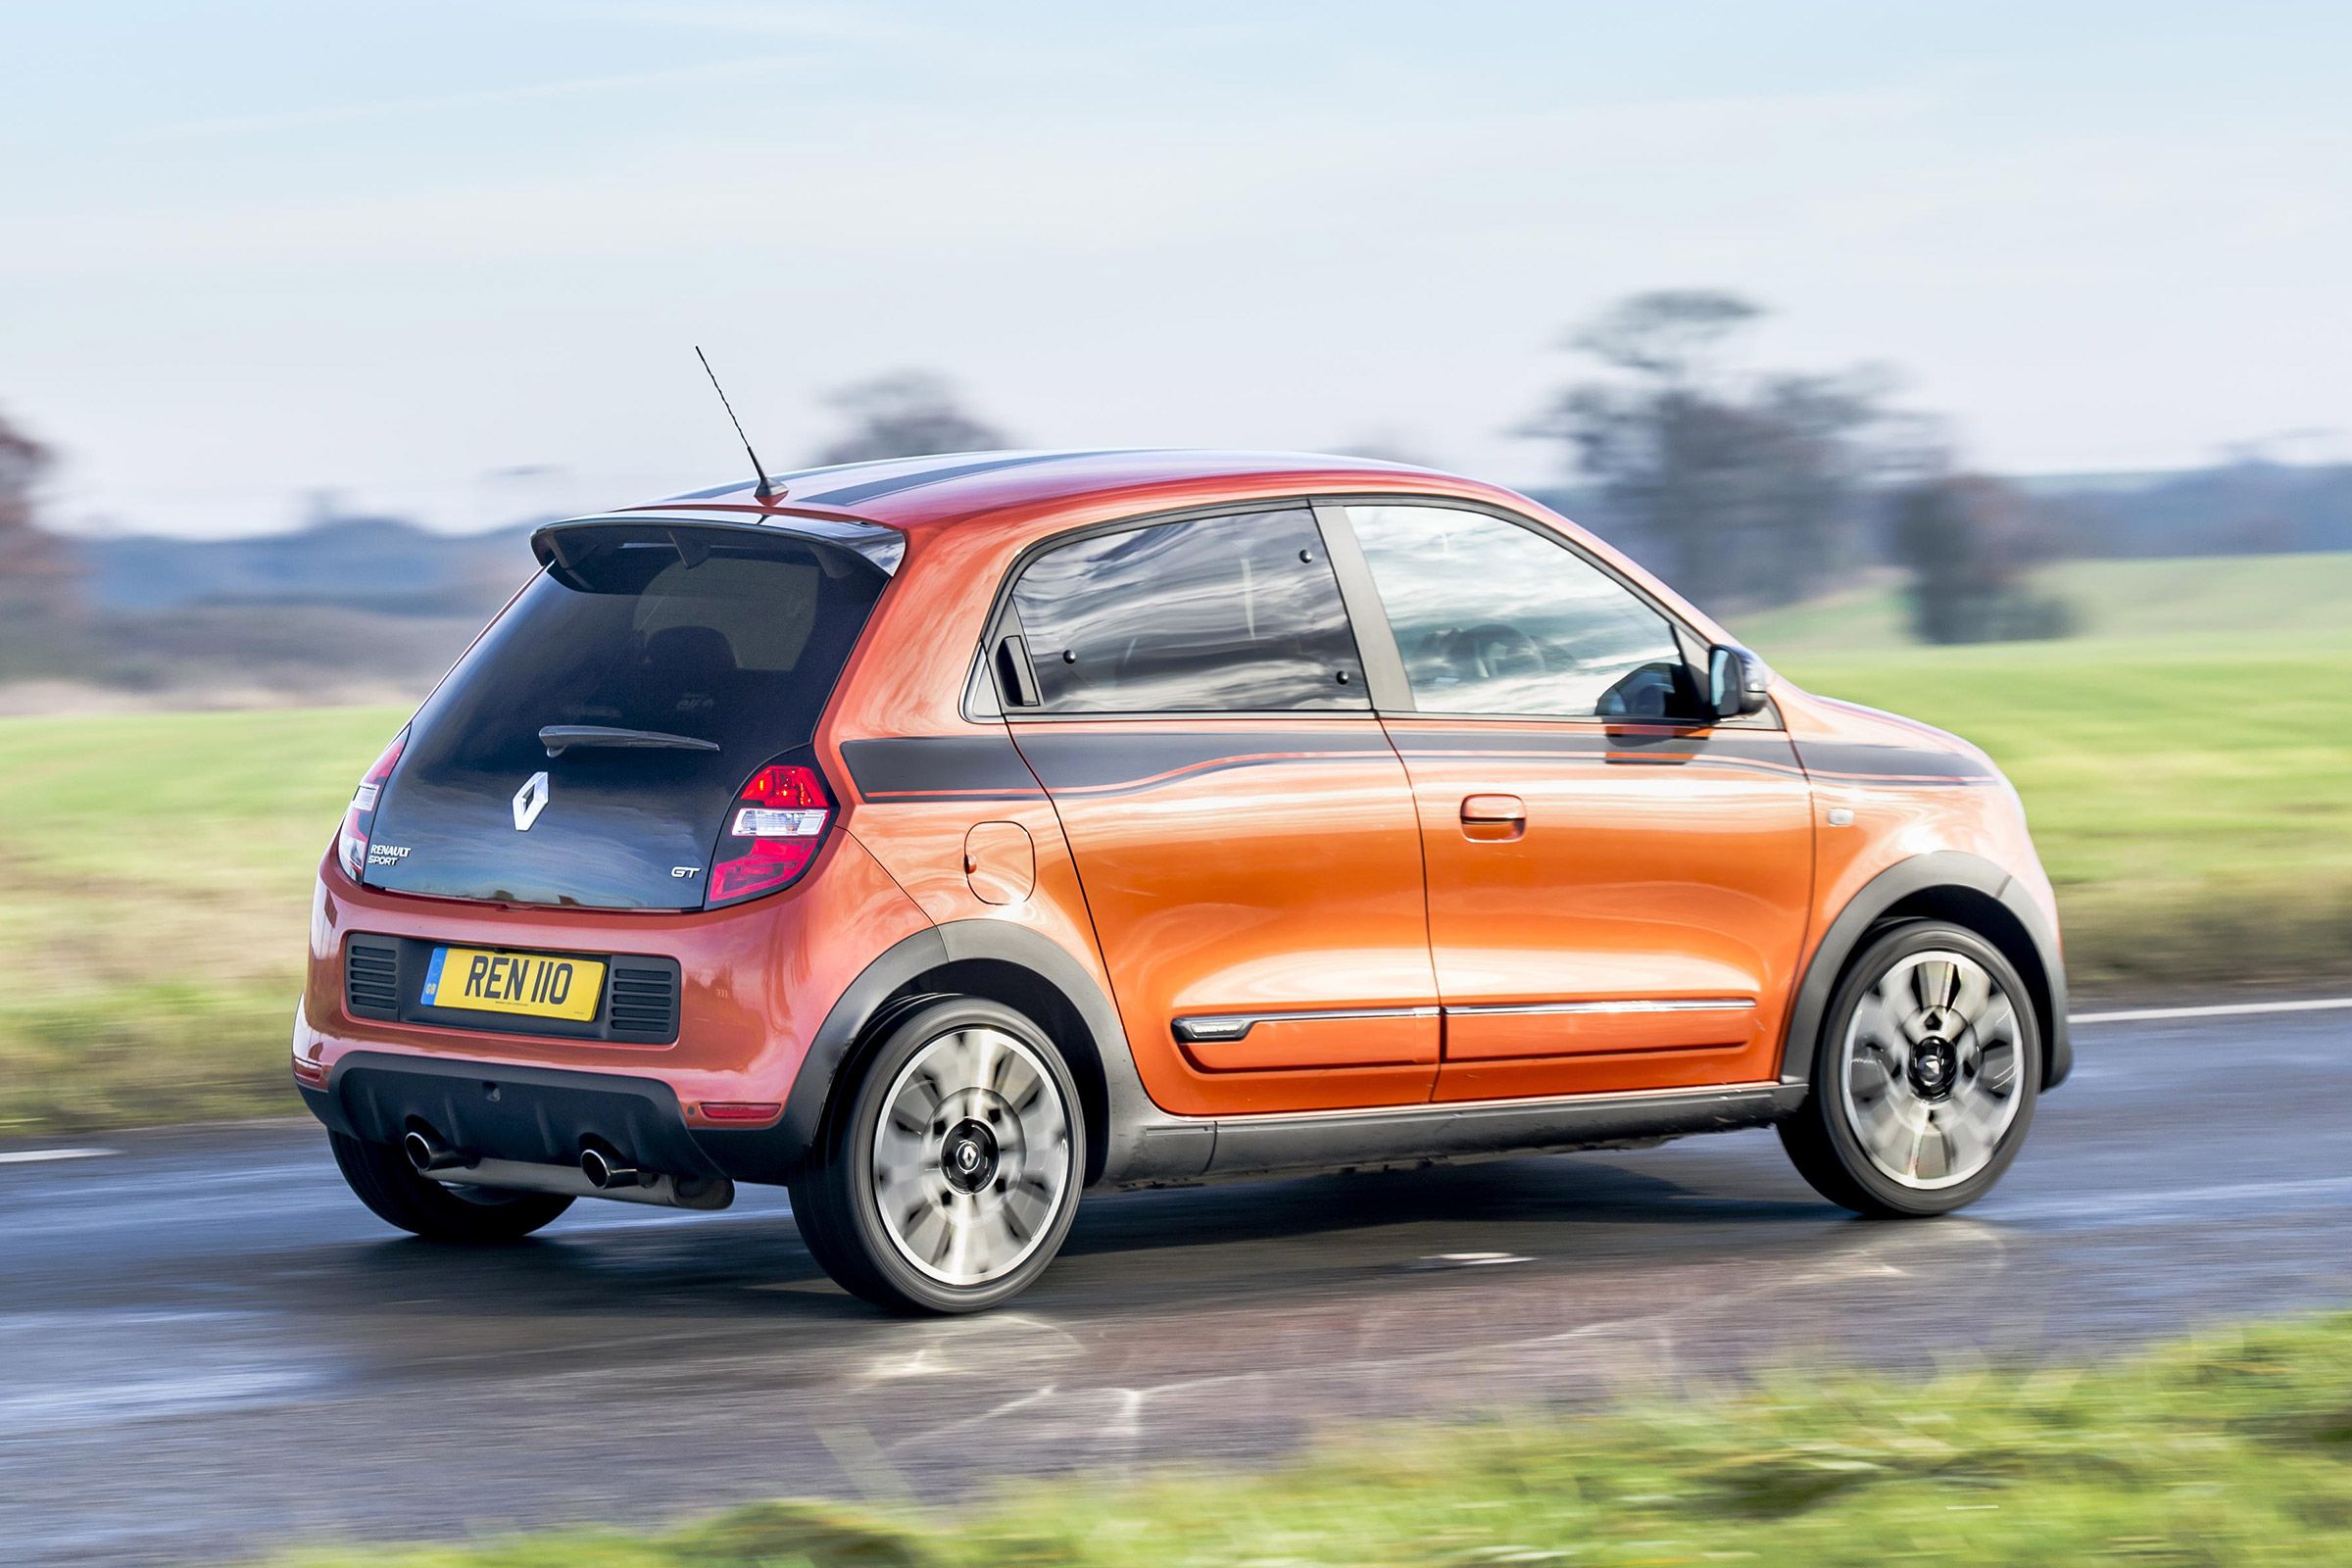 2017 Renault Twingo GT Test Drive Rear And Side View (View 4 of 20)